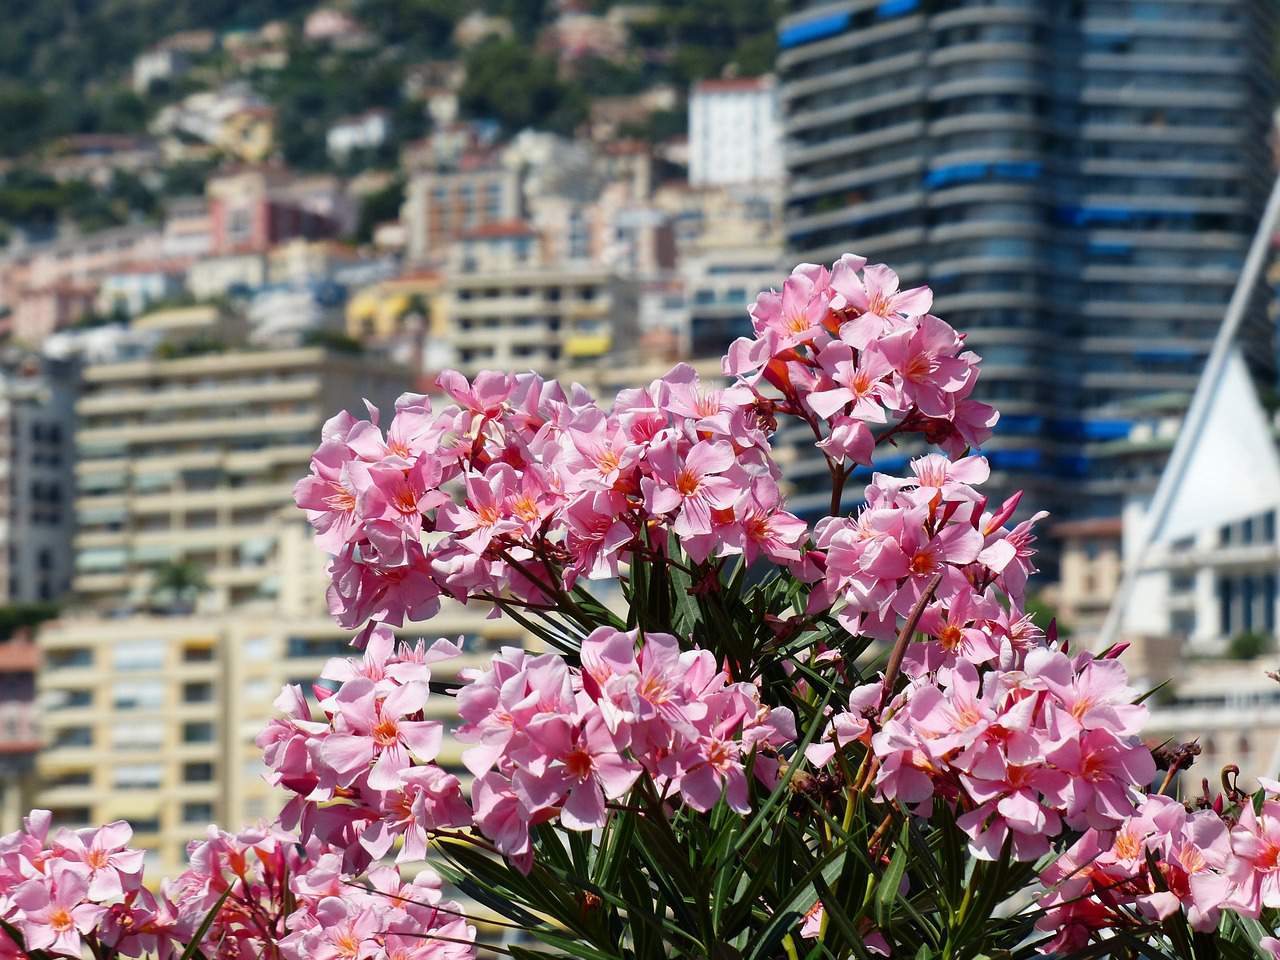 Monaco with oleander in foreground